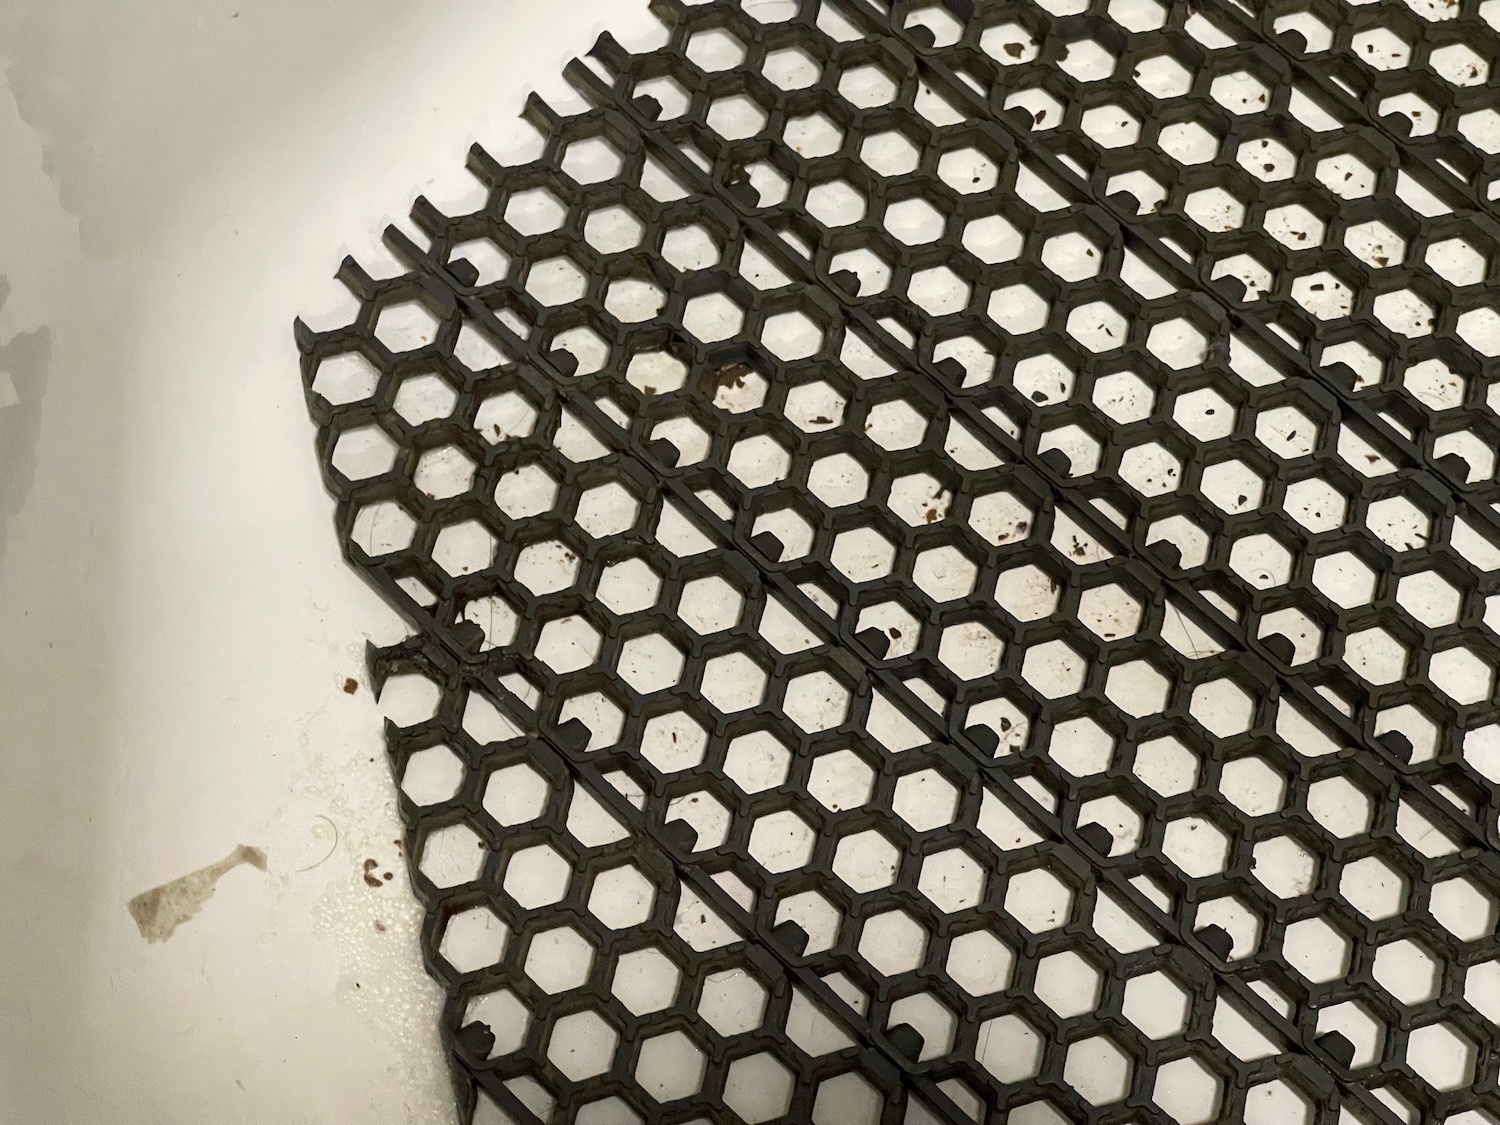 a black grate on a white surface